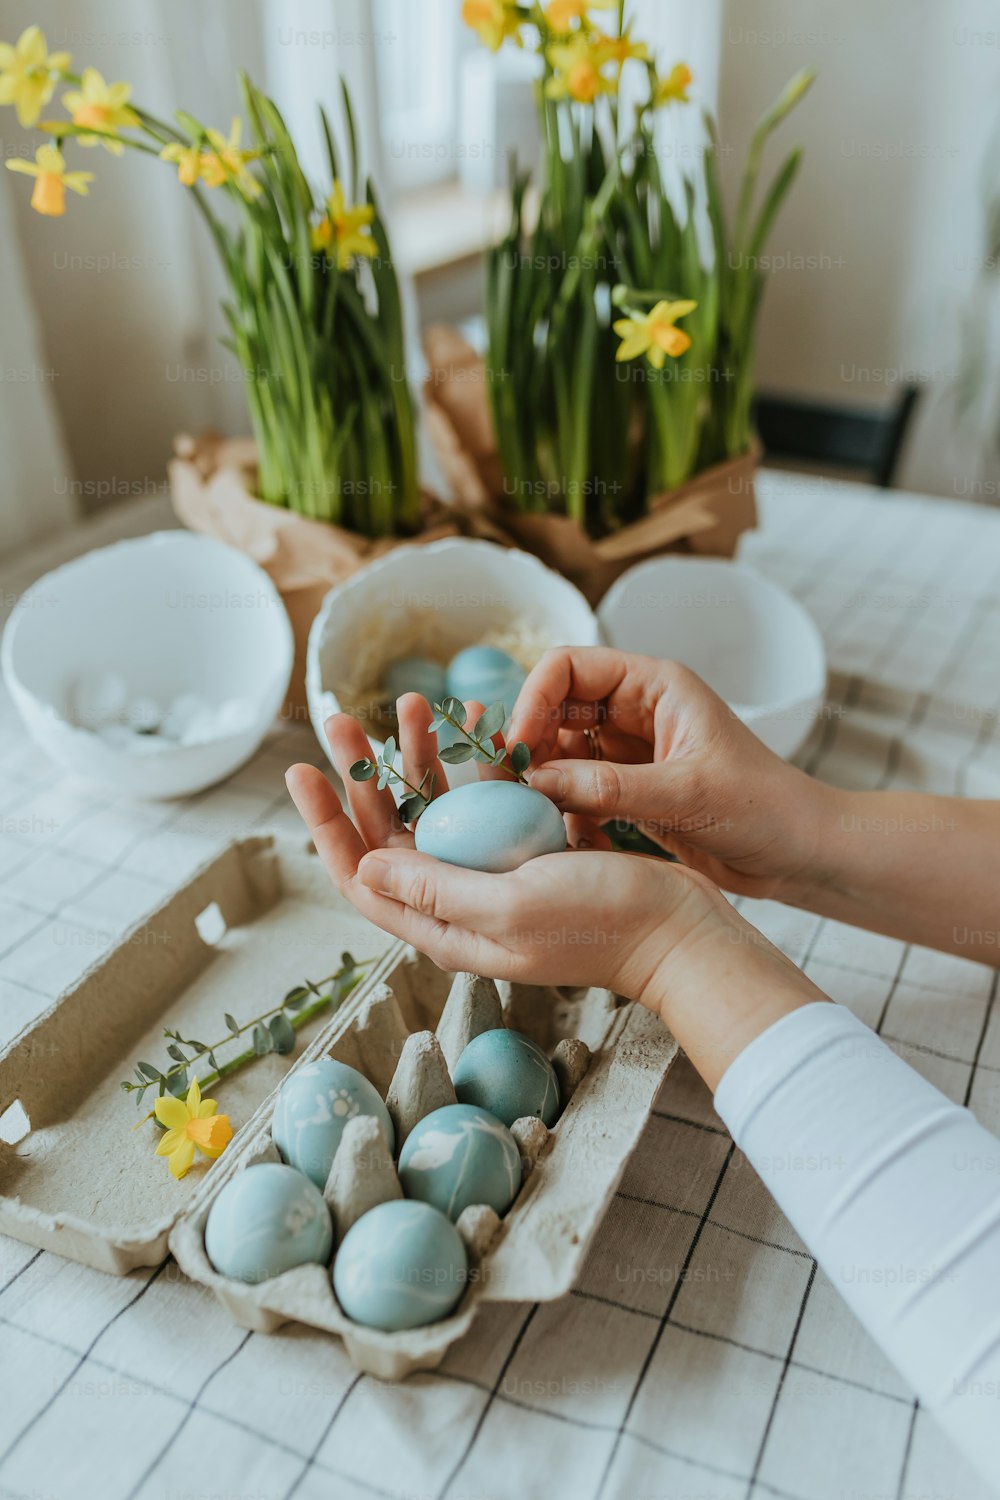 a person holding a bowl filled with blue and white eggs